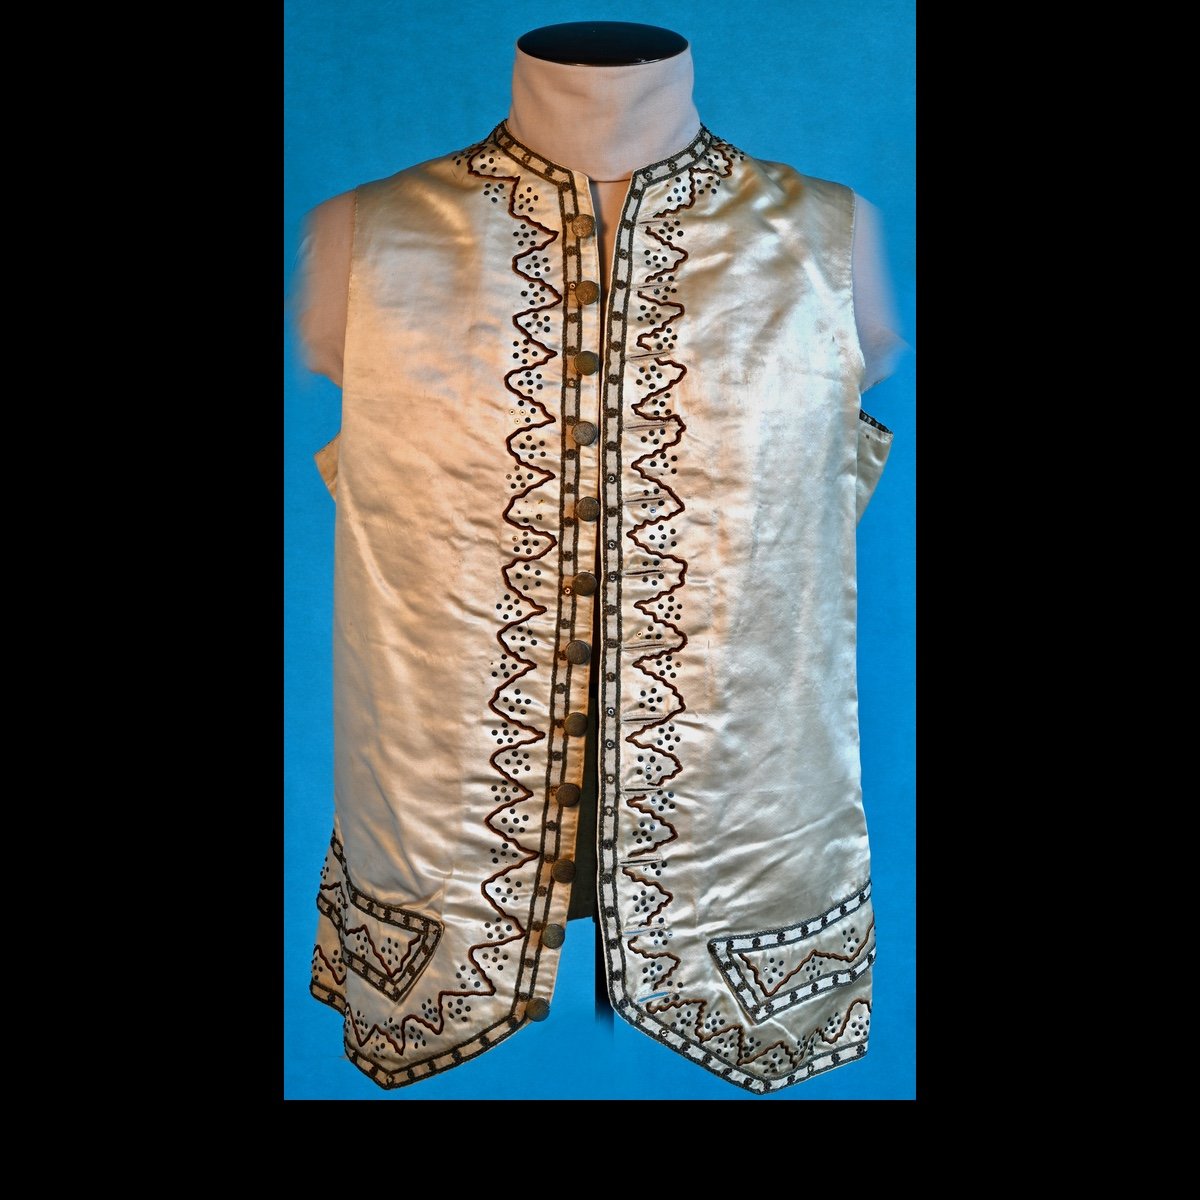 1775 cream satin waistcoat with brown silk embroidery and spangles